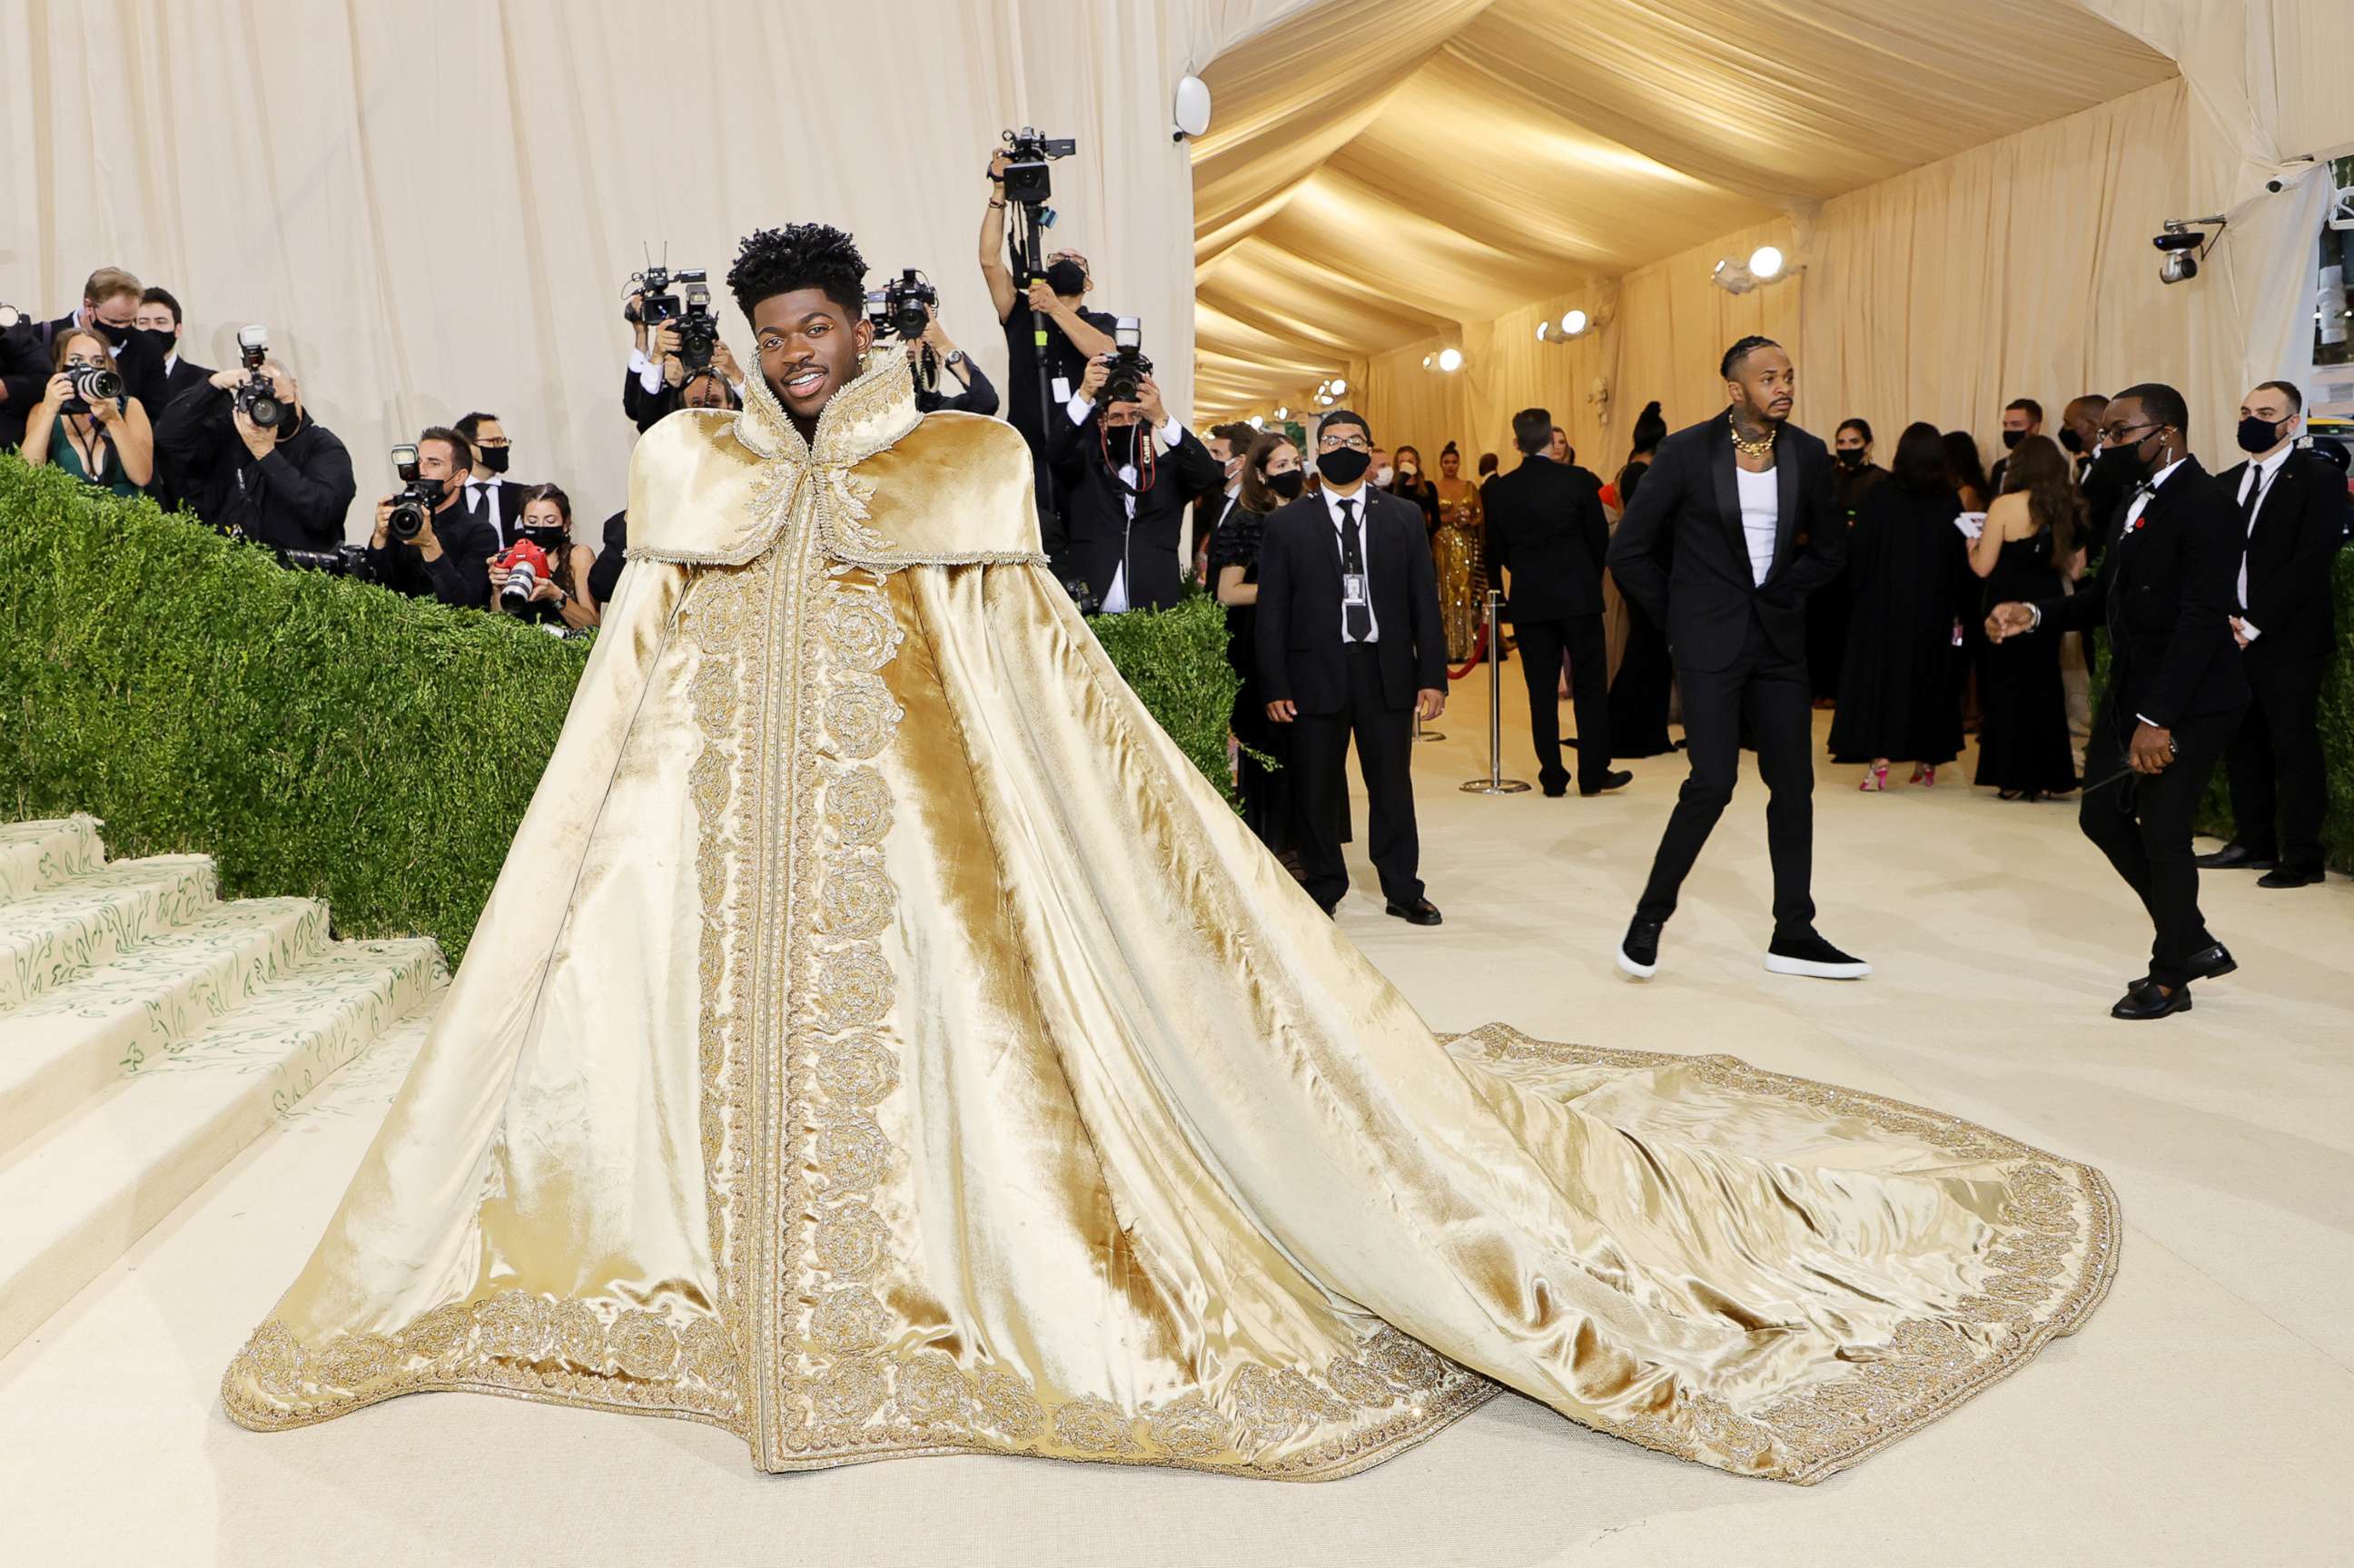 Billie Eilish to Lil Nas X, who wore what to MET Gala 2021 - India Today